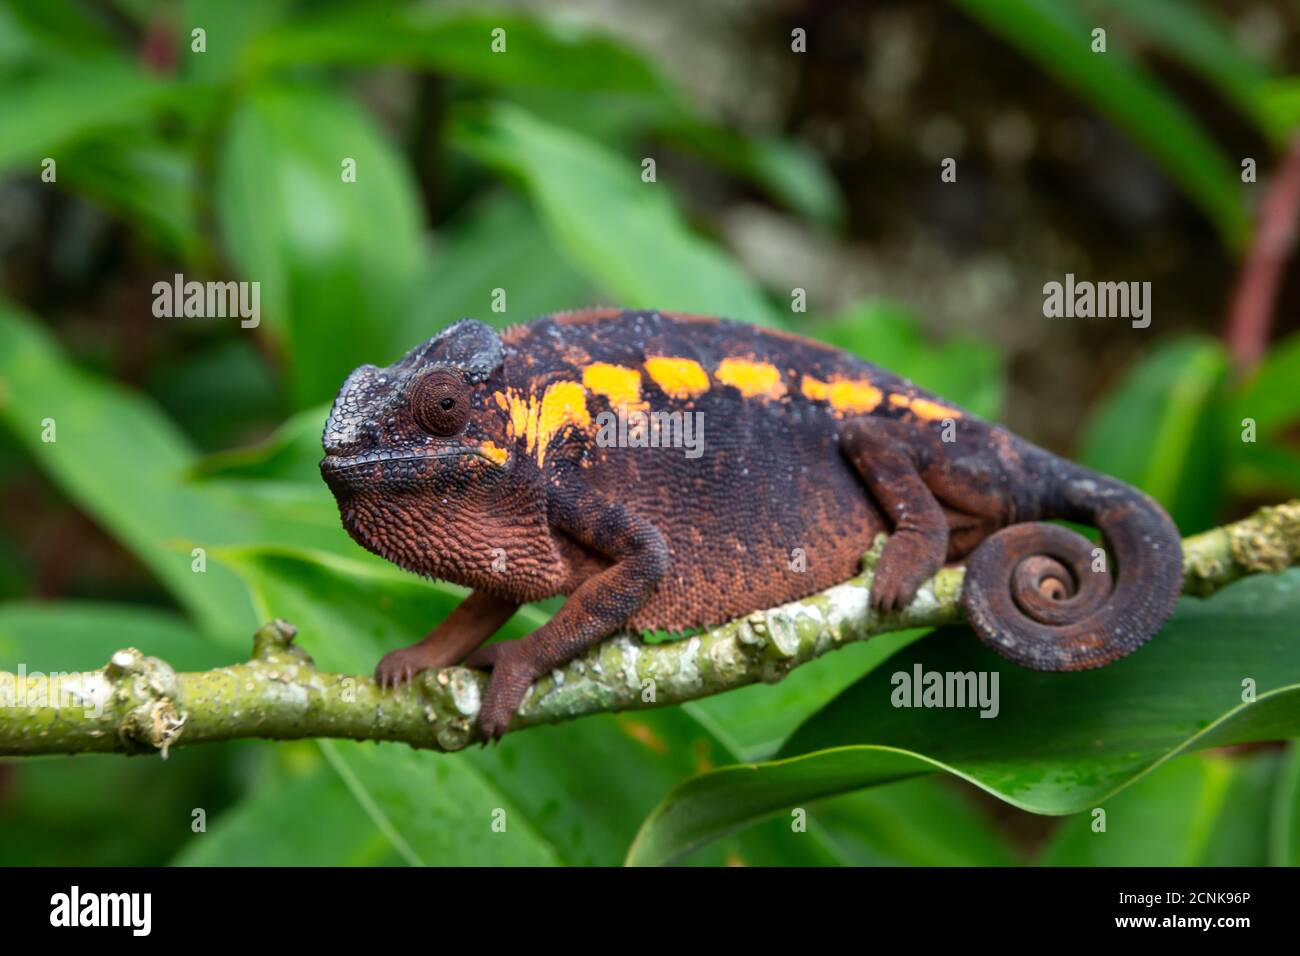 An earth-colored chameleon on a branch Stock Photo